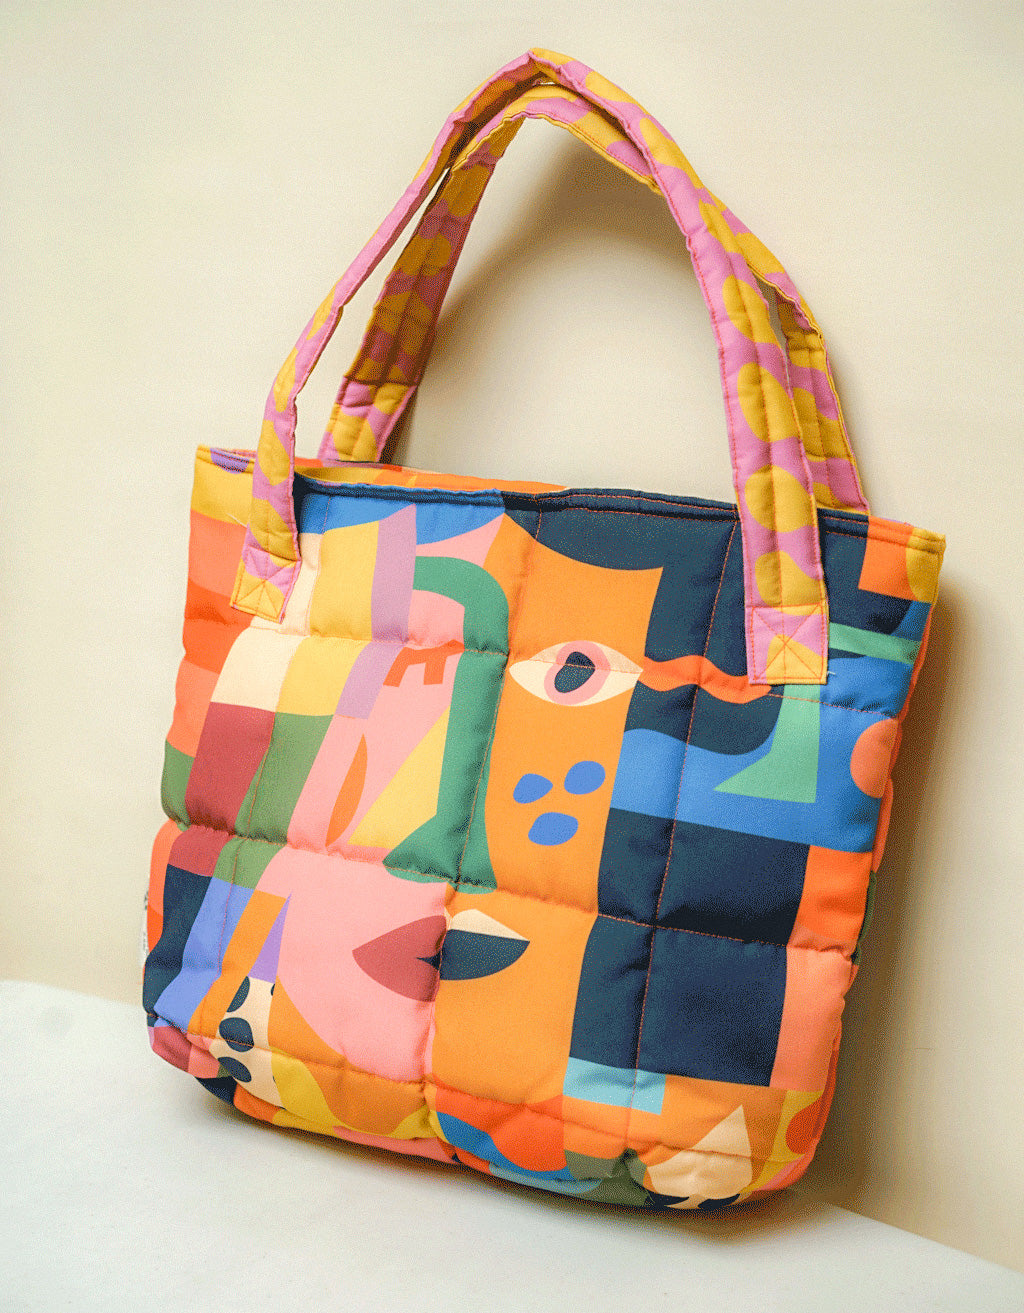 Marshmallow Bag - Picasso – SmittenbyPattern